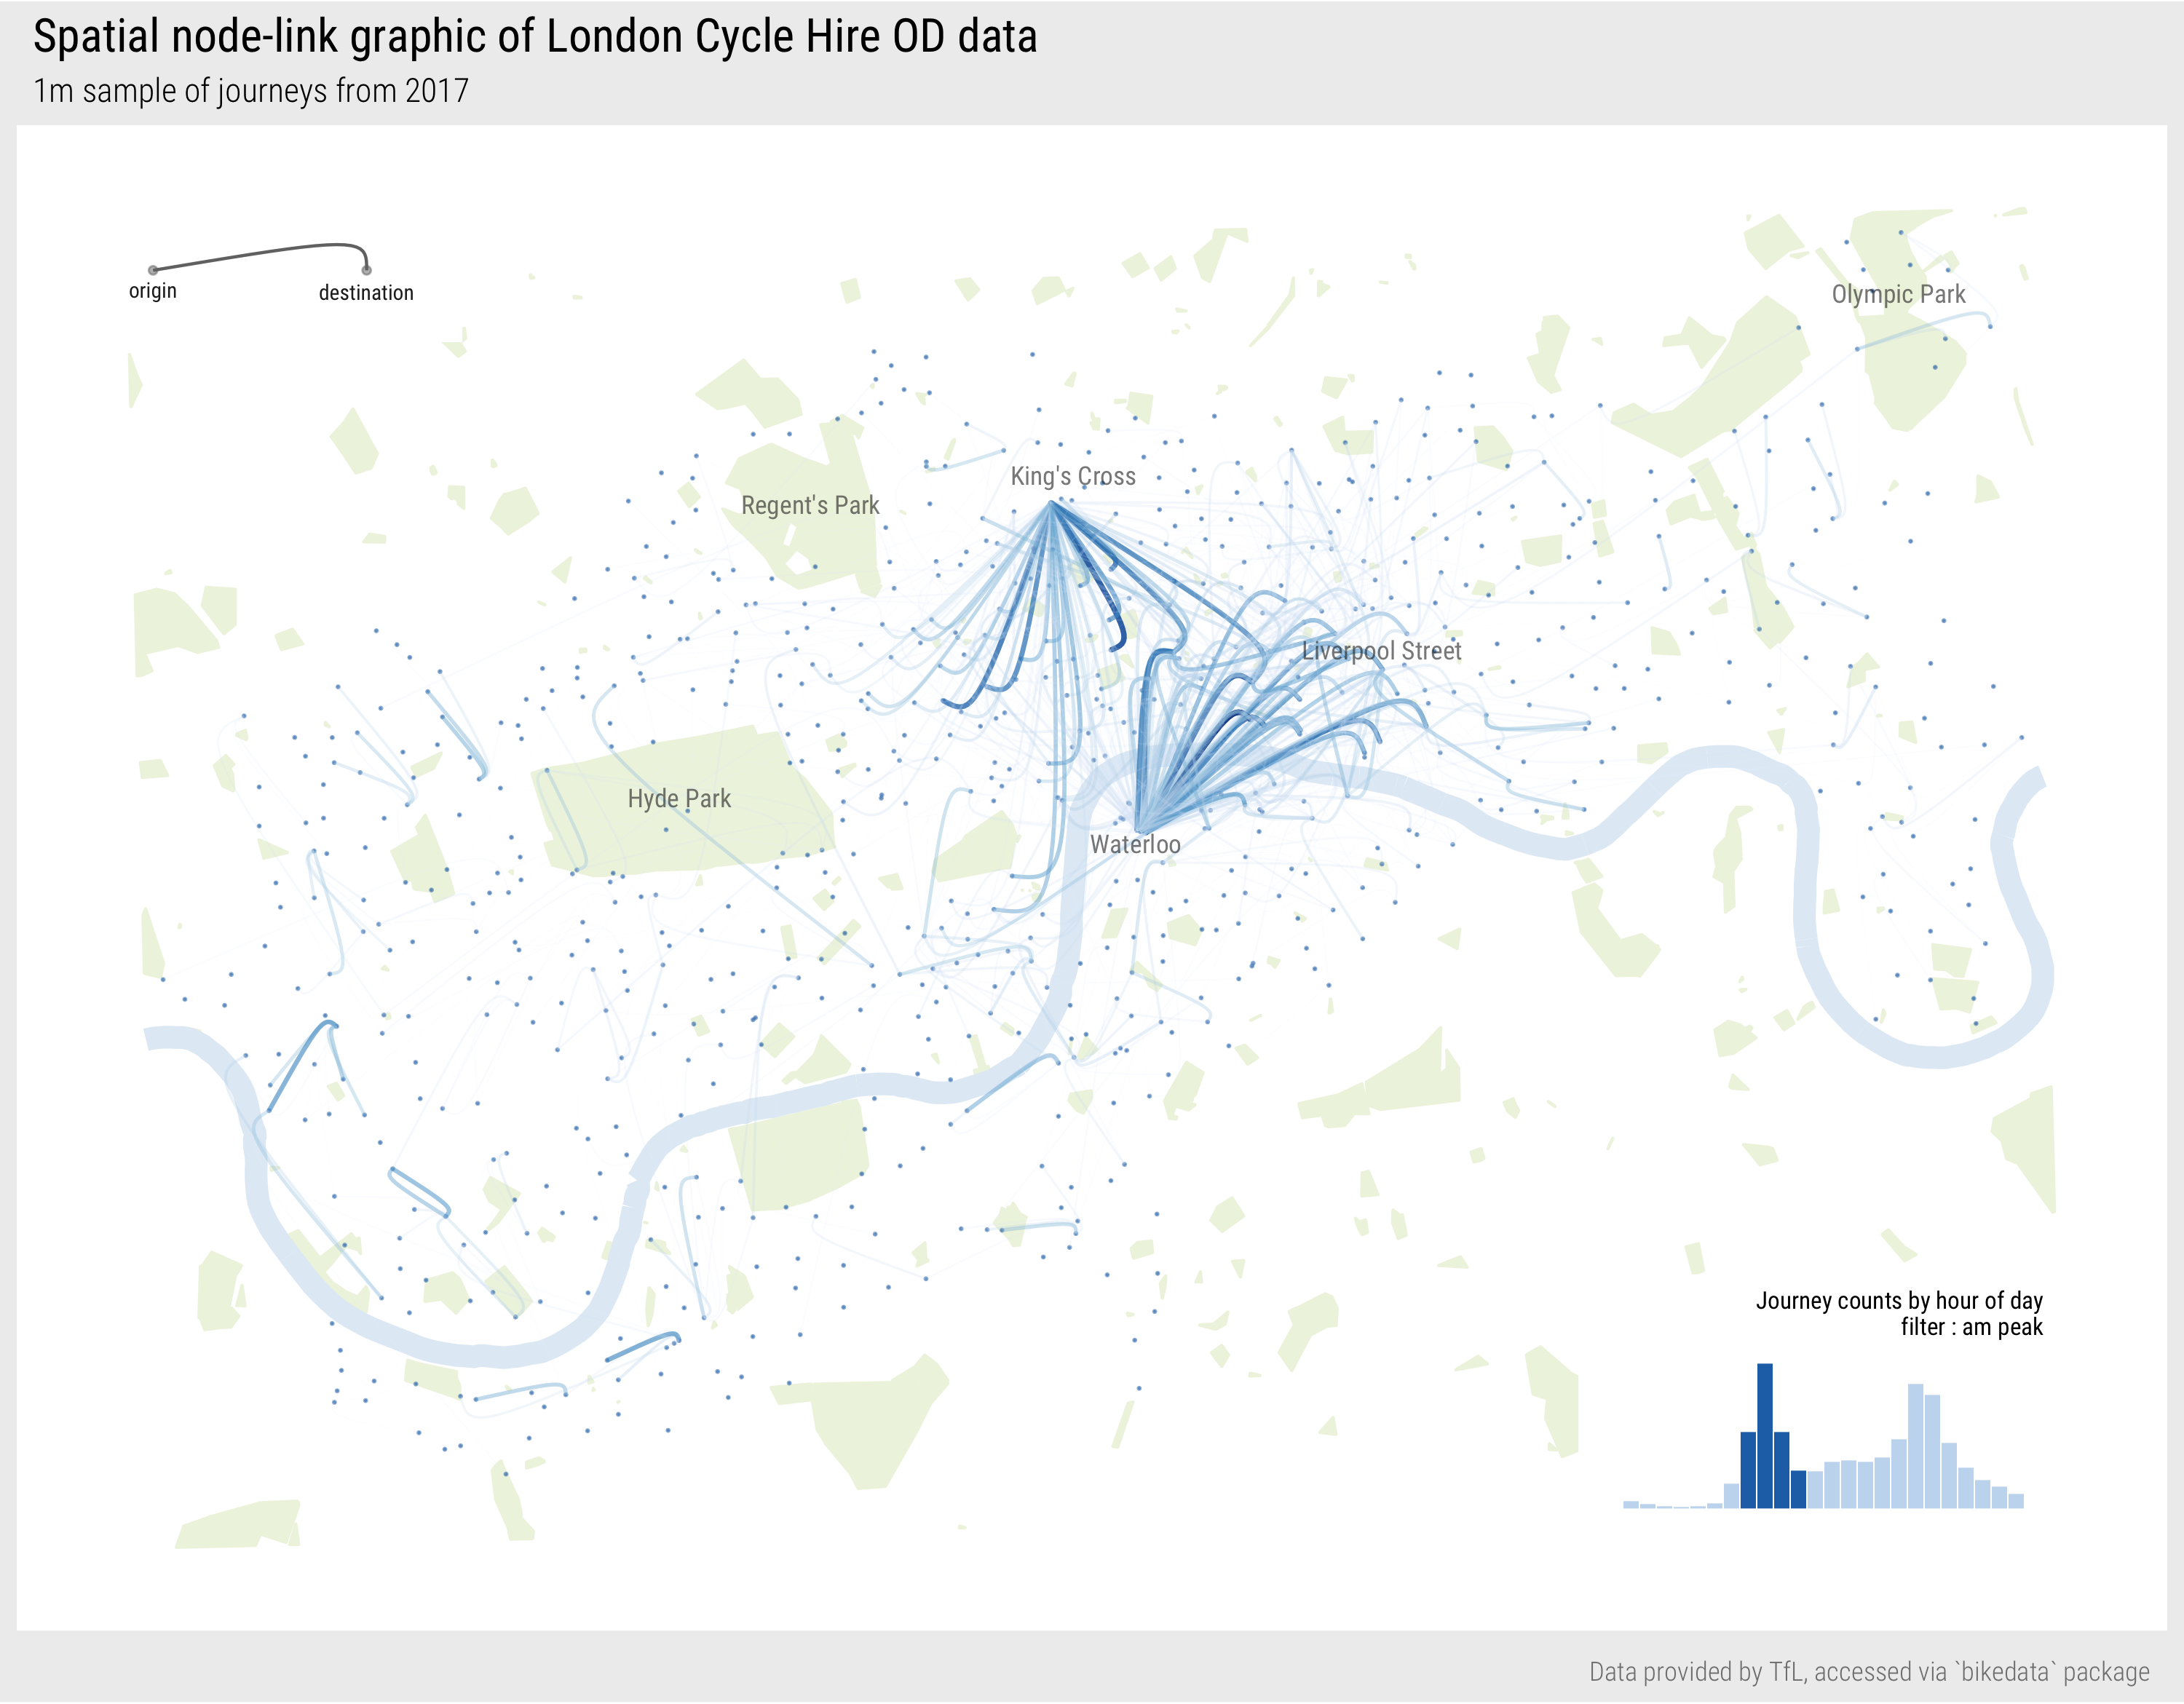 Flow map of London Cycle Hire Scheme trips in the weakday morning peak. Data by TfL, accessed via [bikedata](https://docs.ropensci.org/bikedata/); parks and river outline via [OSM](https://www.openstreetmap.org/).